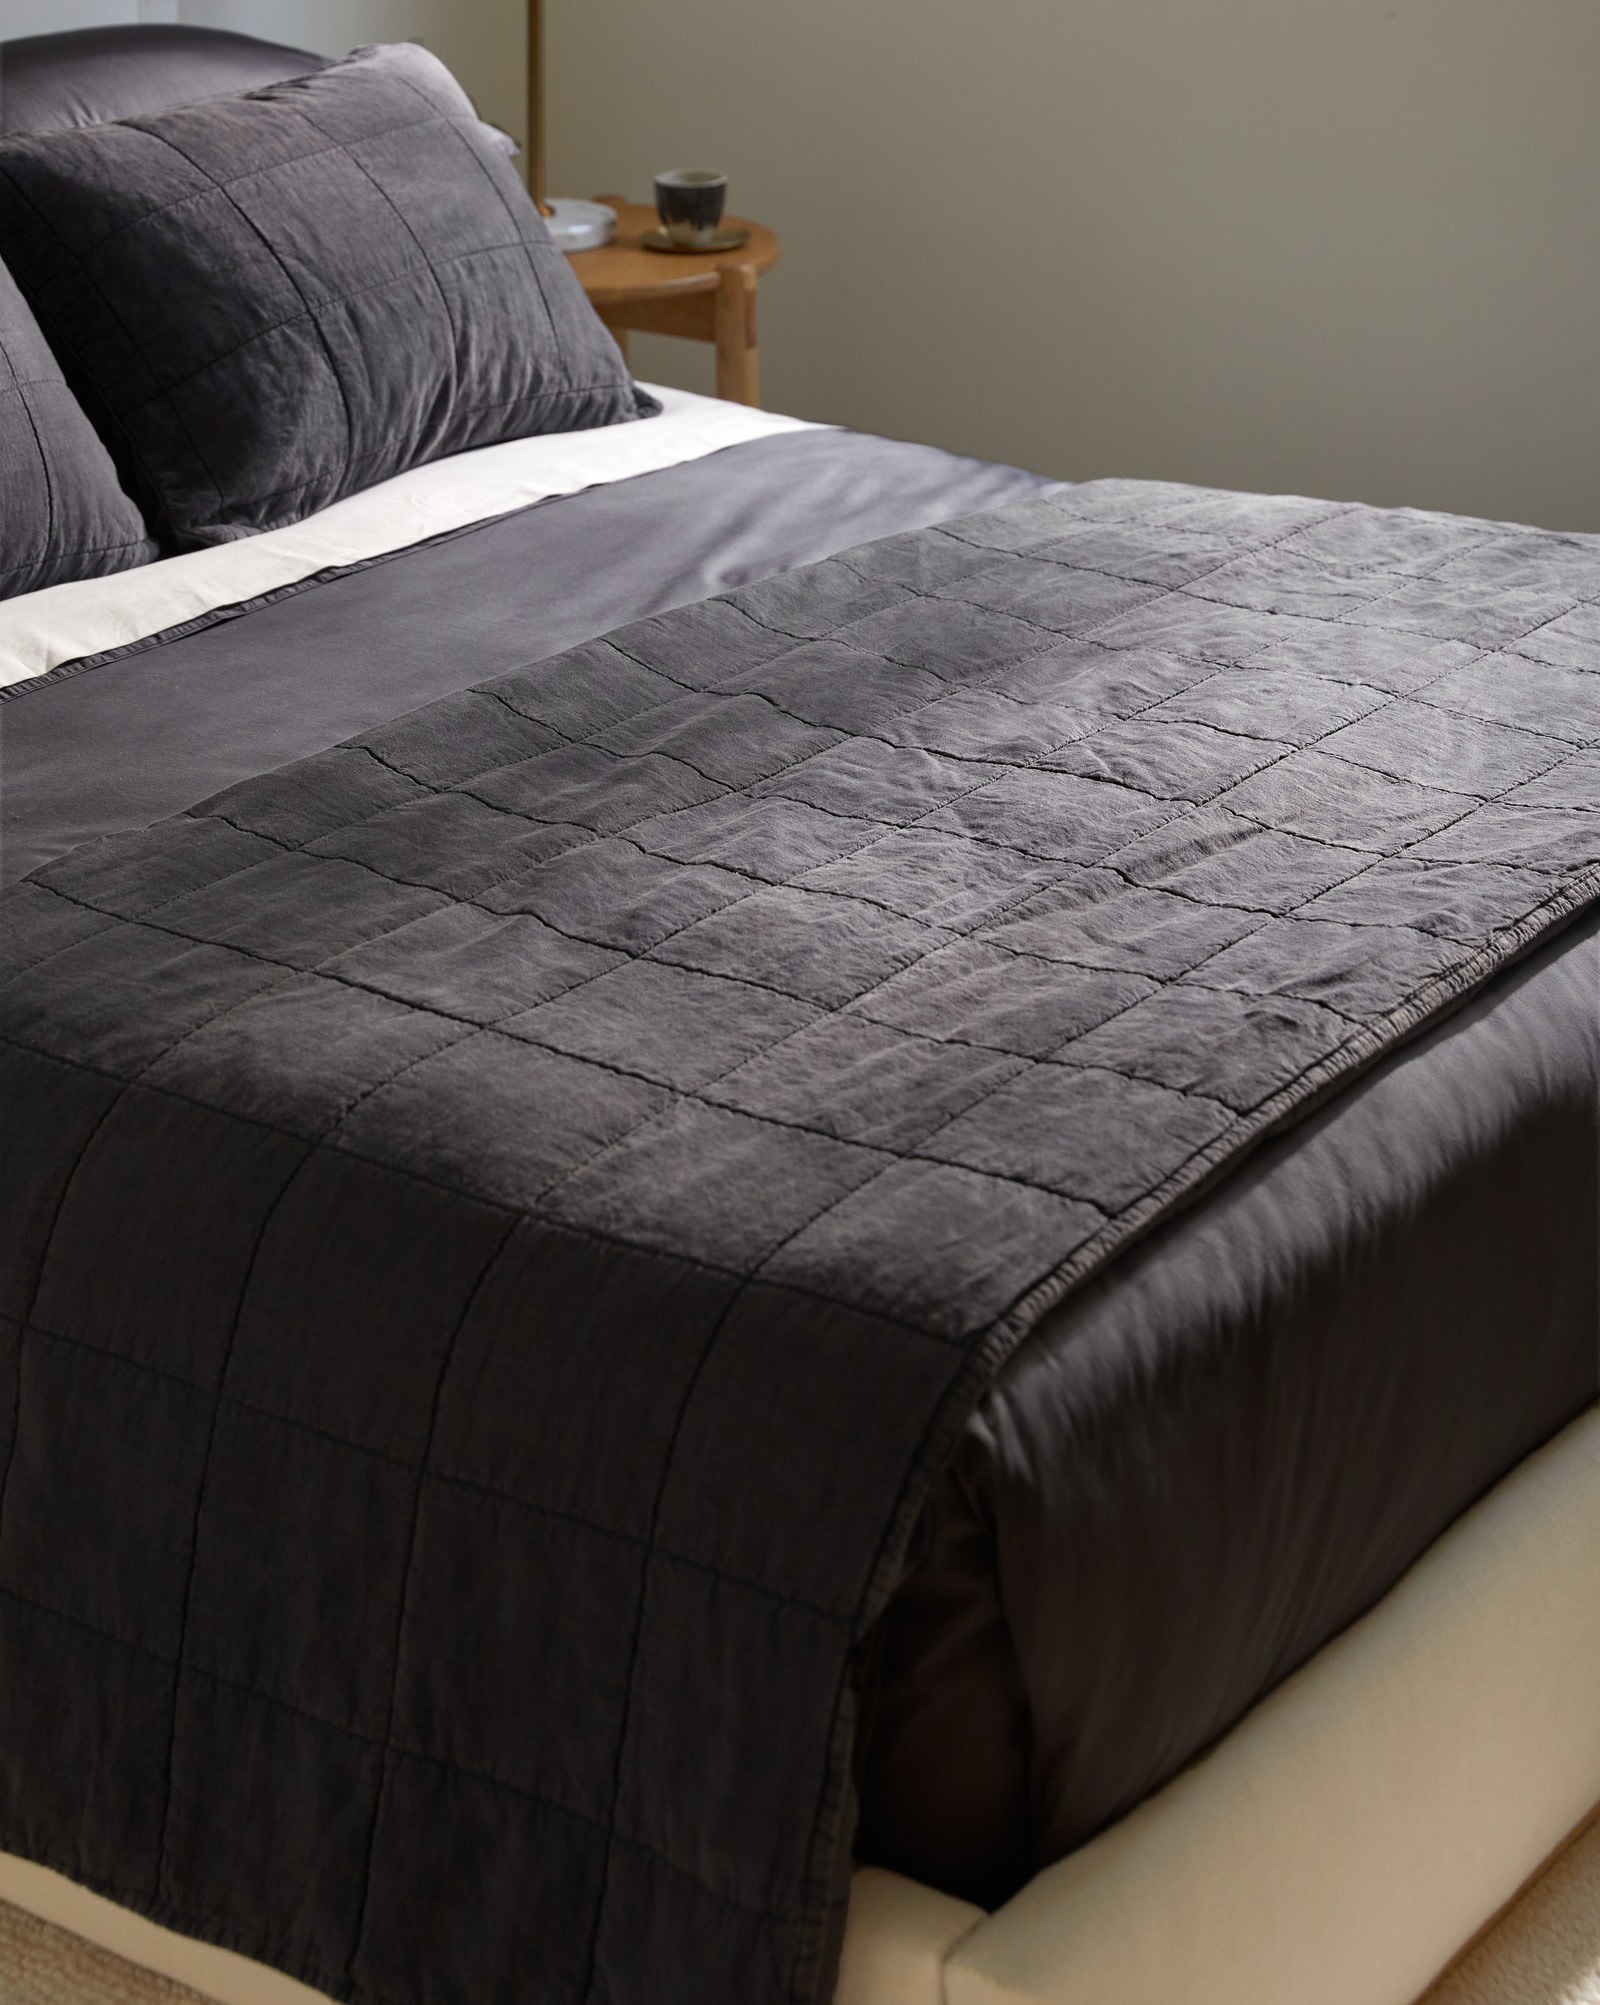 A dark grey coal linen quilt with a box pattern folded neatly at the foot of a bed